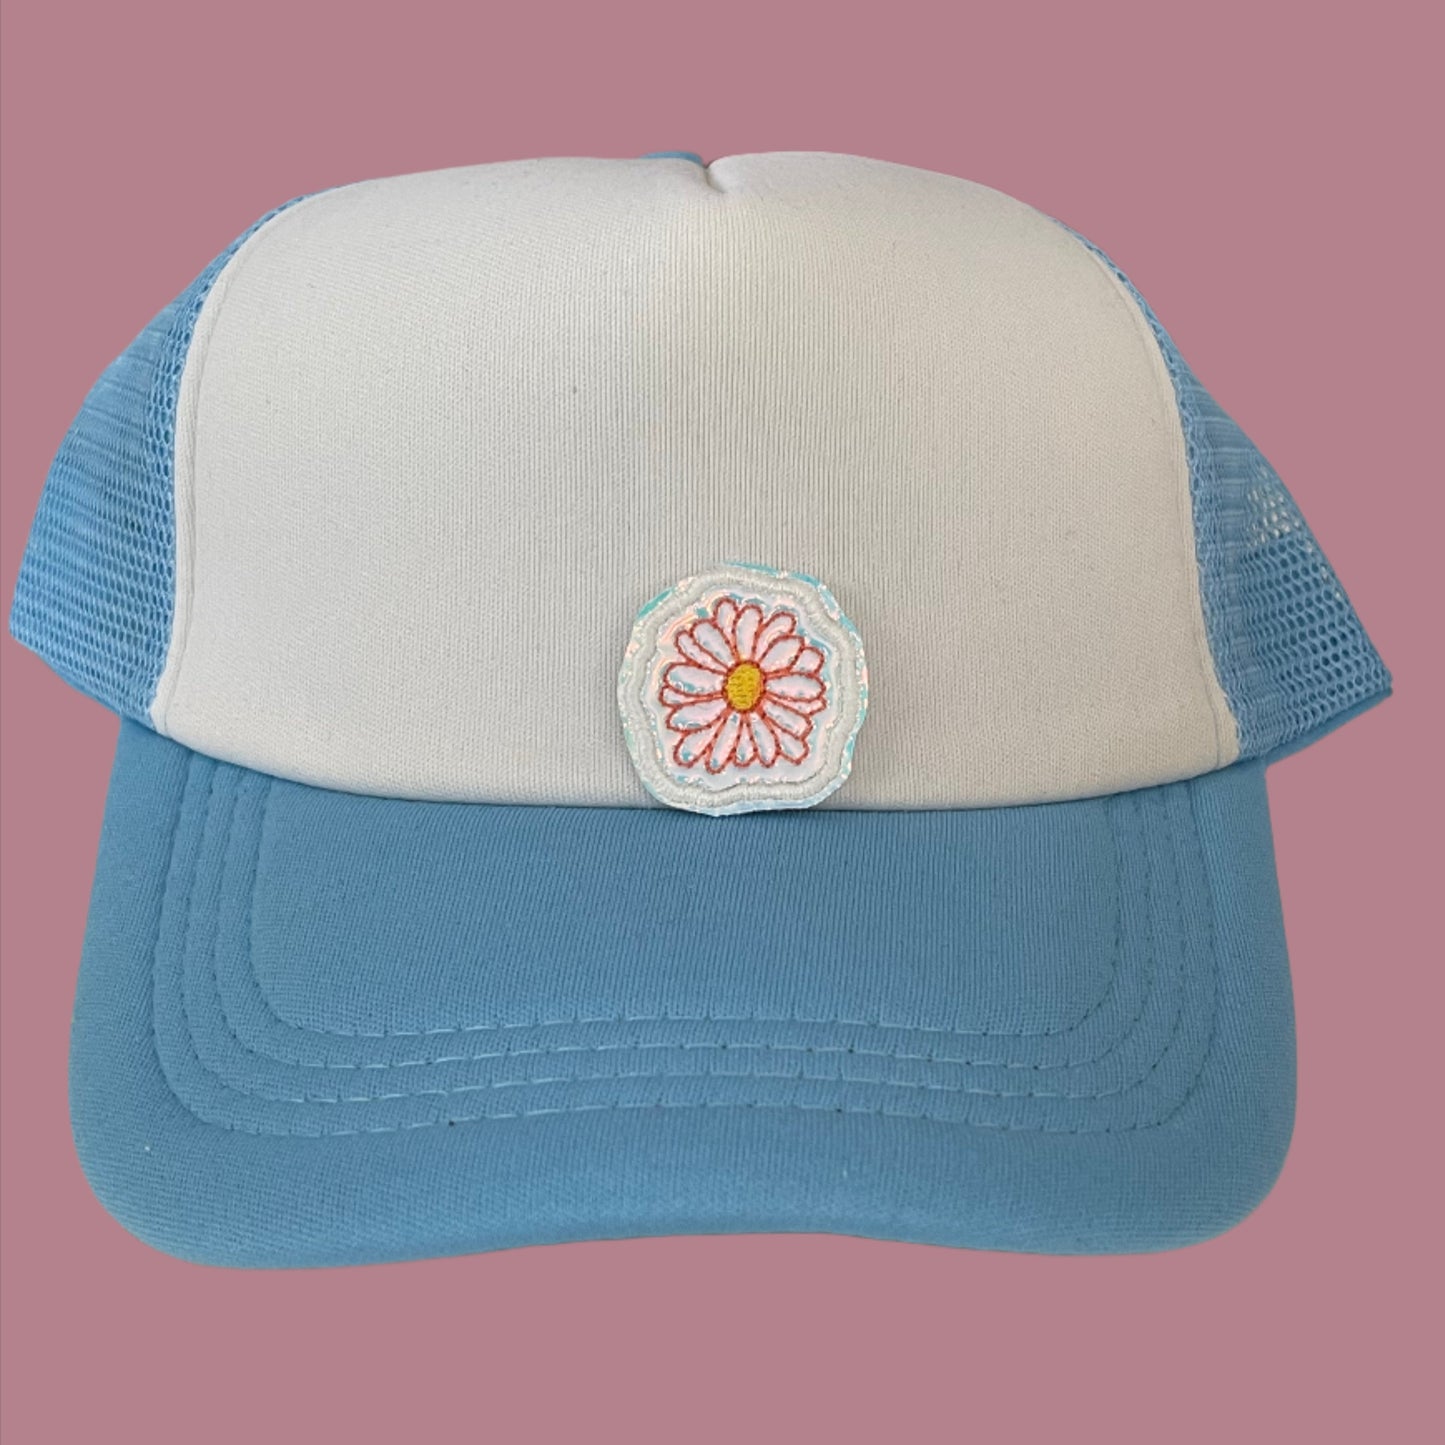 Close-up of a Boho Daisy embroidered patch featuring a delicate pink daisy with a yellow center, perfect for customizing hats, apparel, and various accessories.